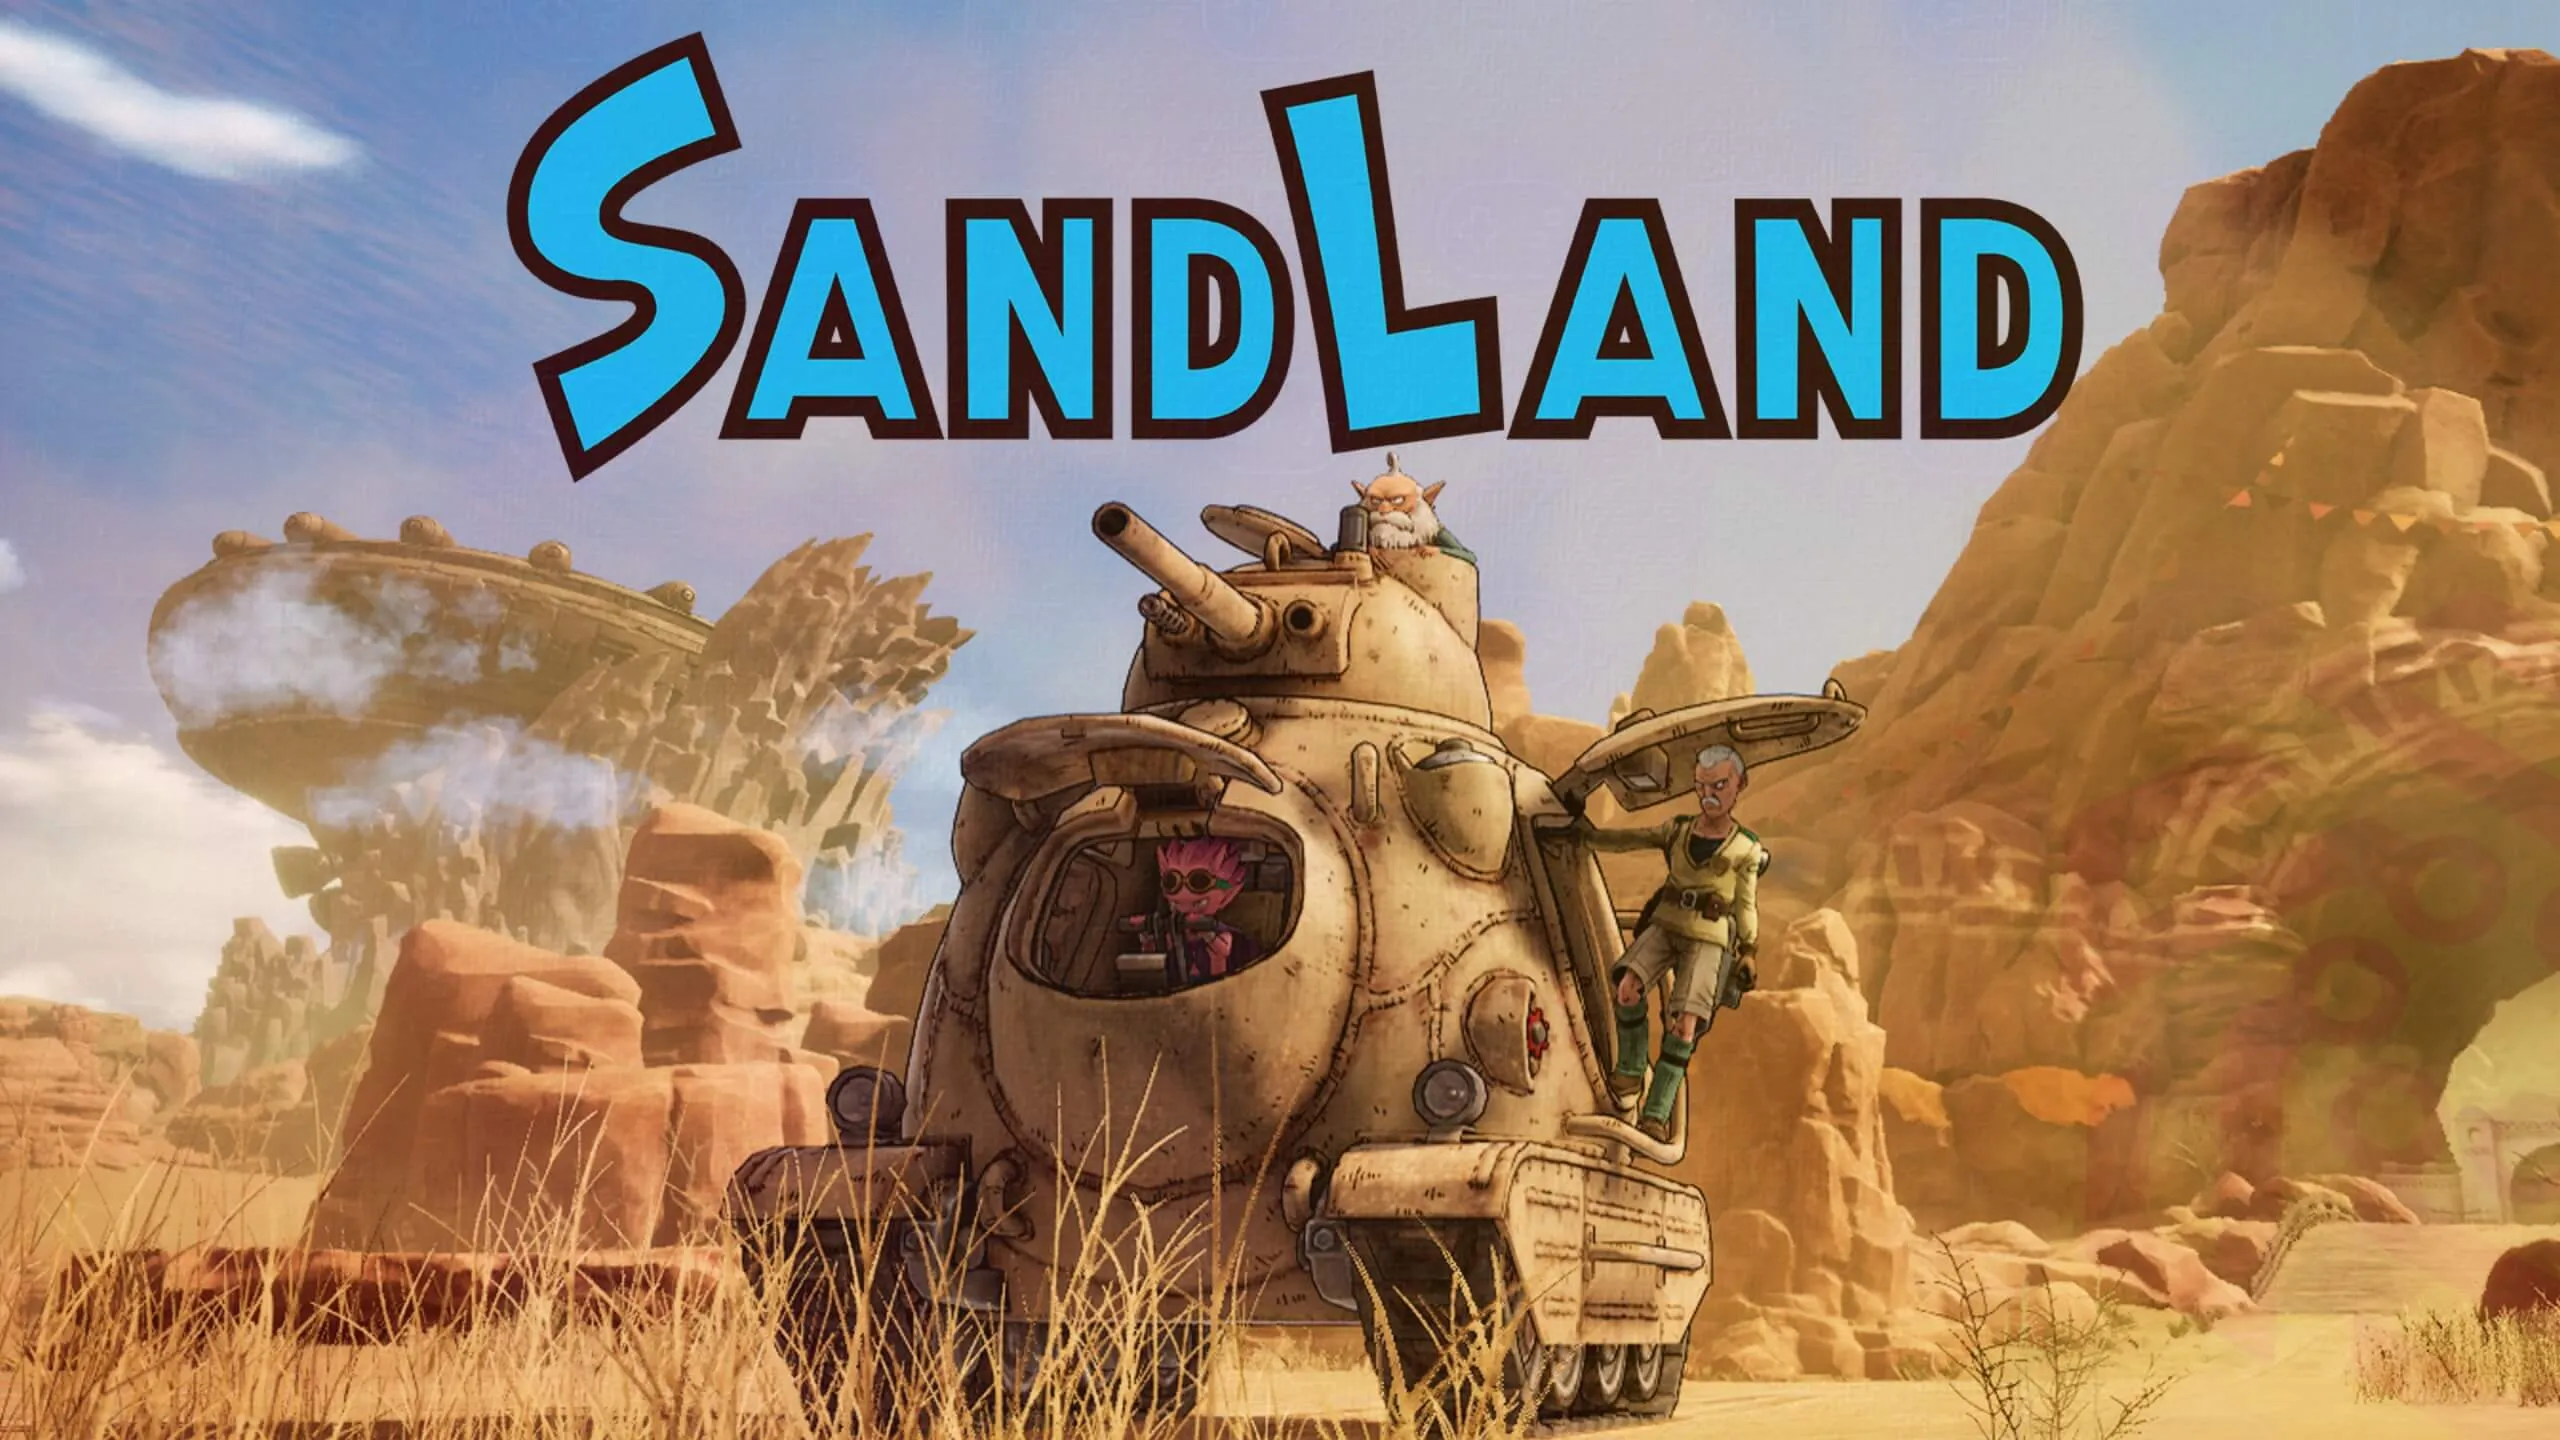 Tank In Desert with Sand Land protagonist